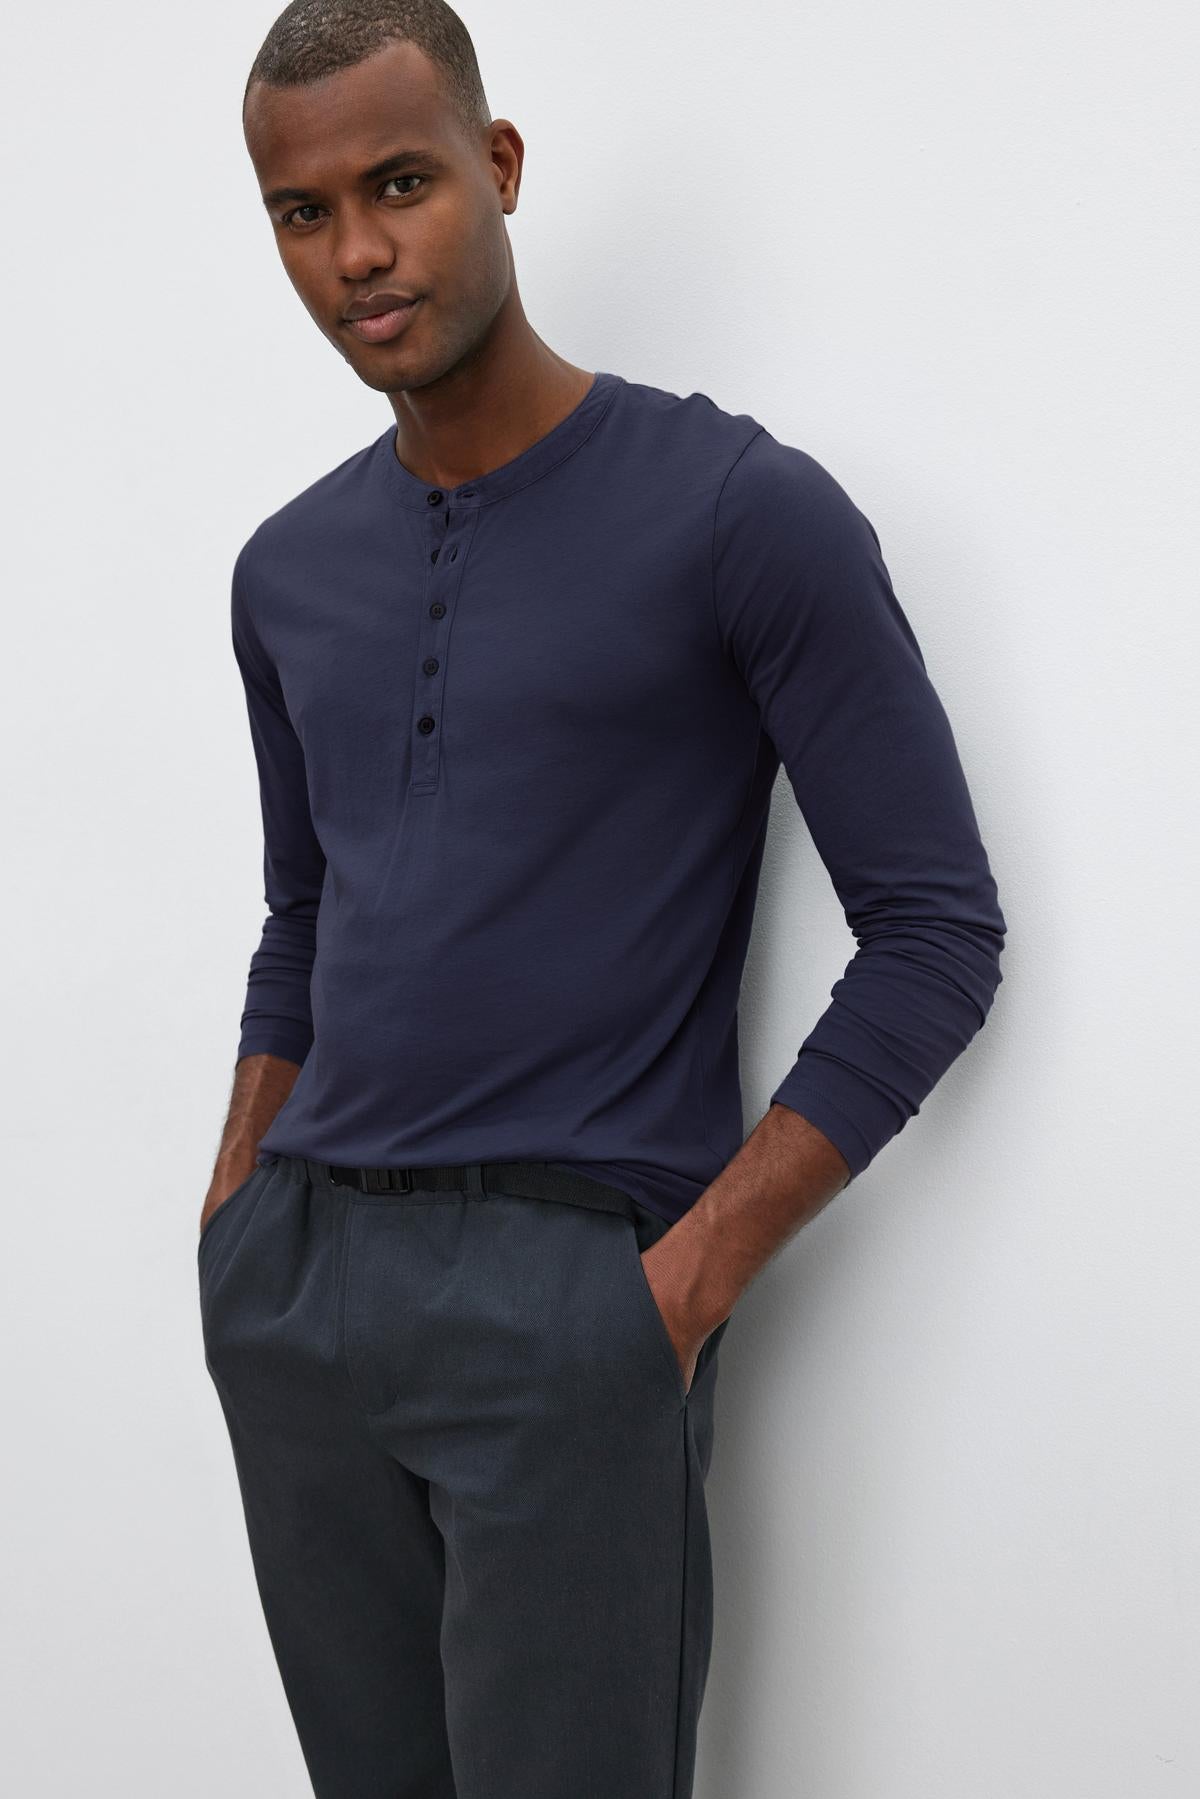   A man with short hair wears a navy long-sleeve ALVARO HENLEY by Velvet by Graham & Spencer and dark trousers, standing with his hands in his pockets against a plain white background. 